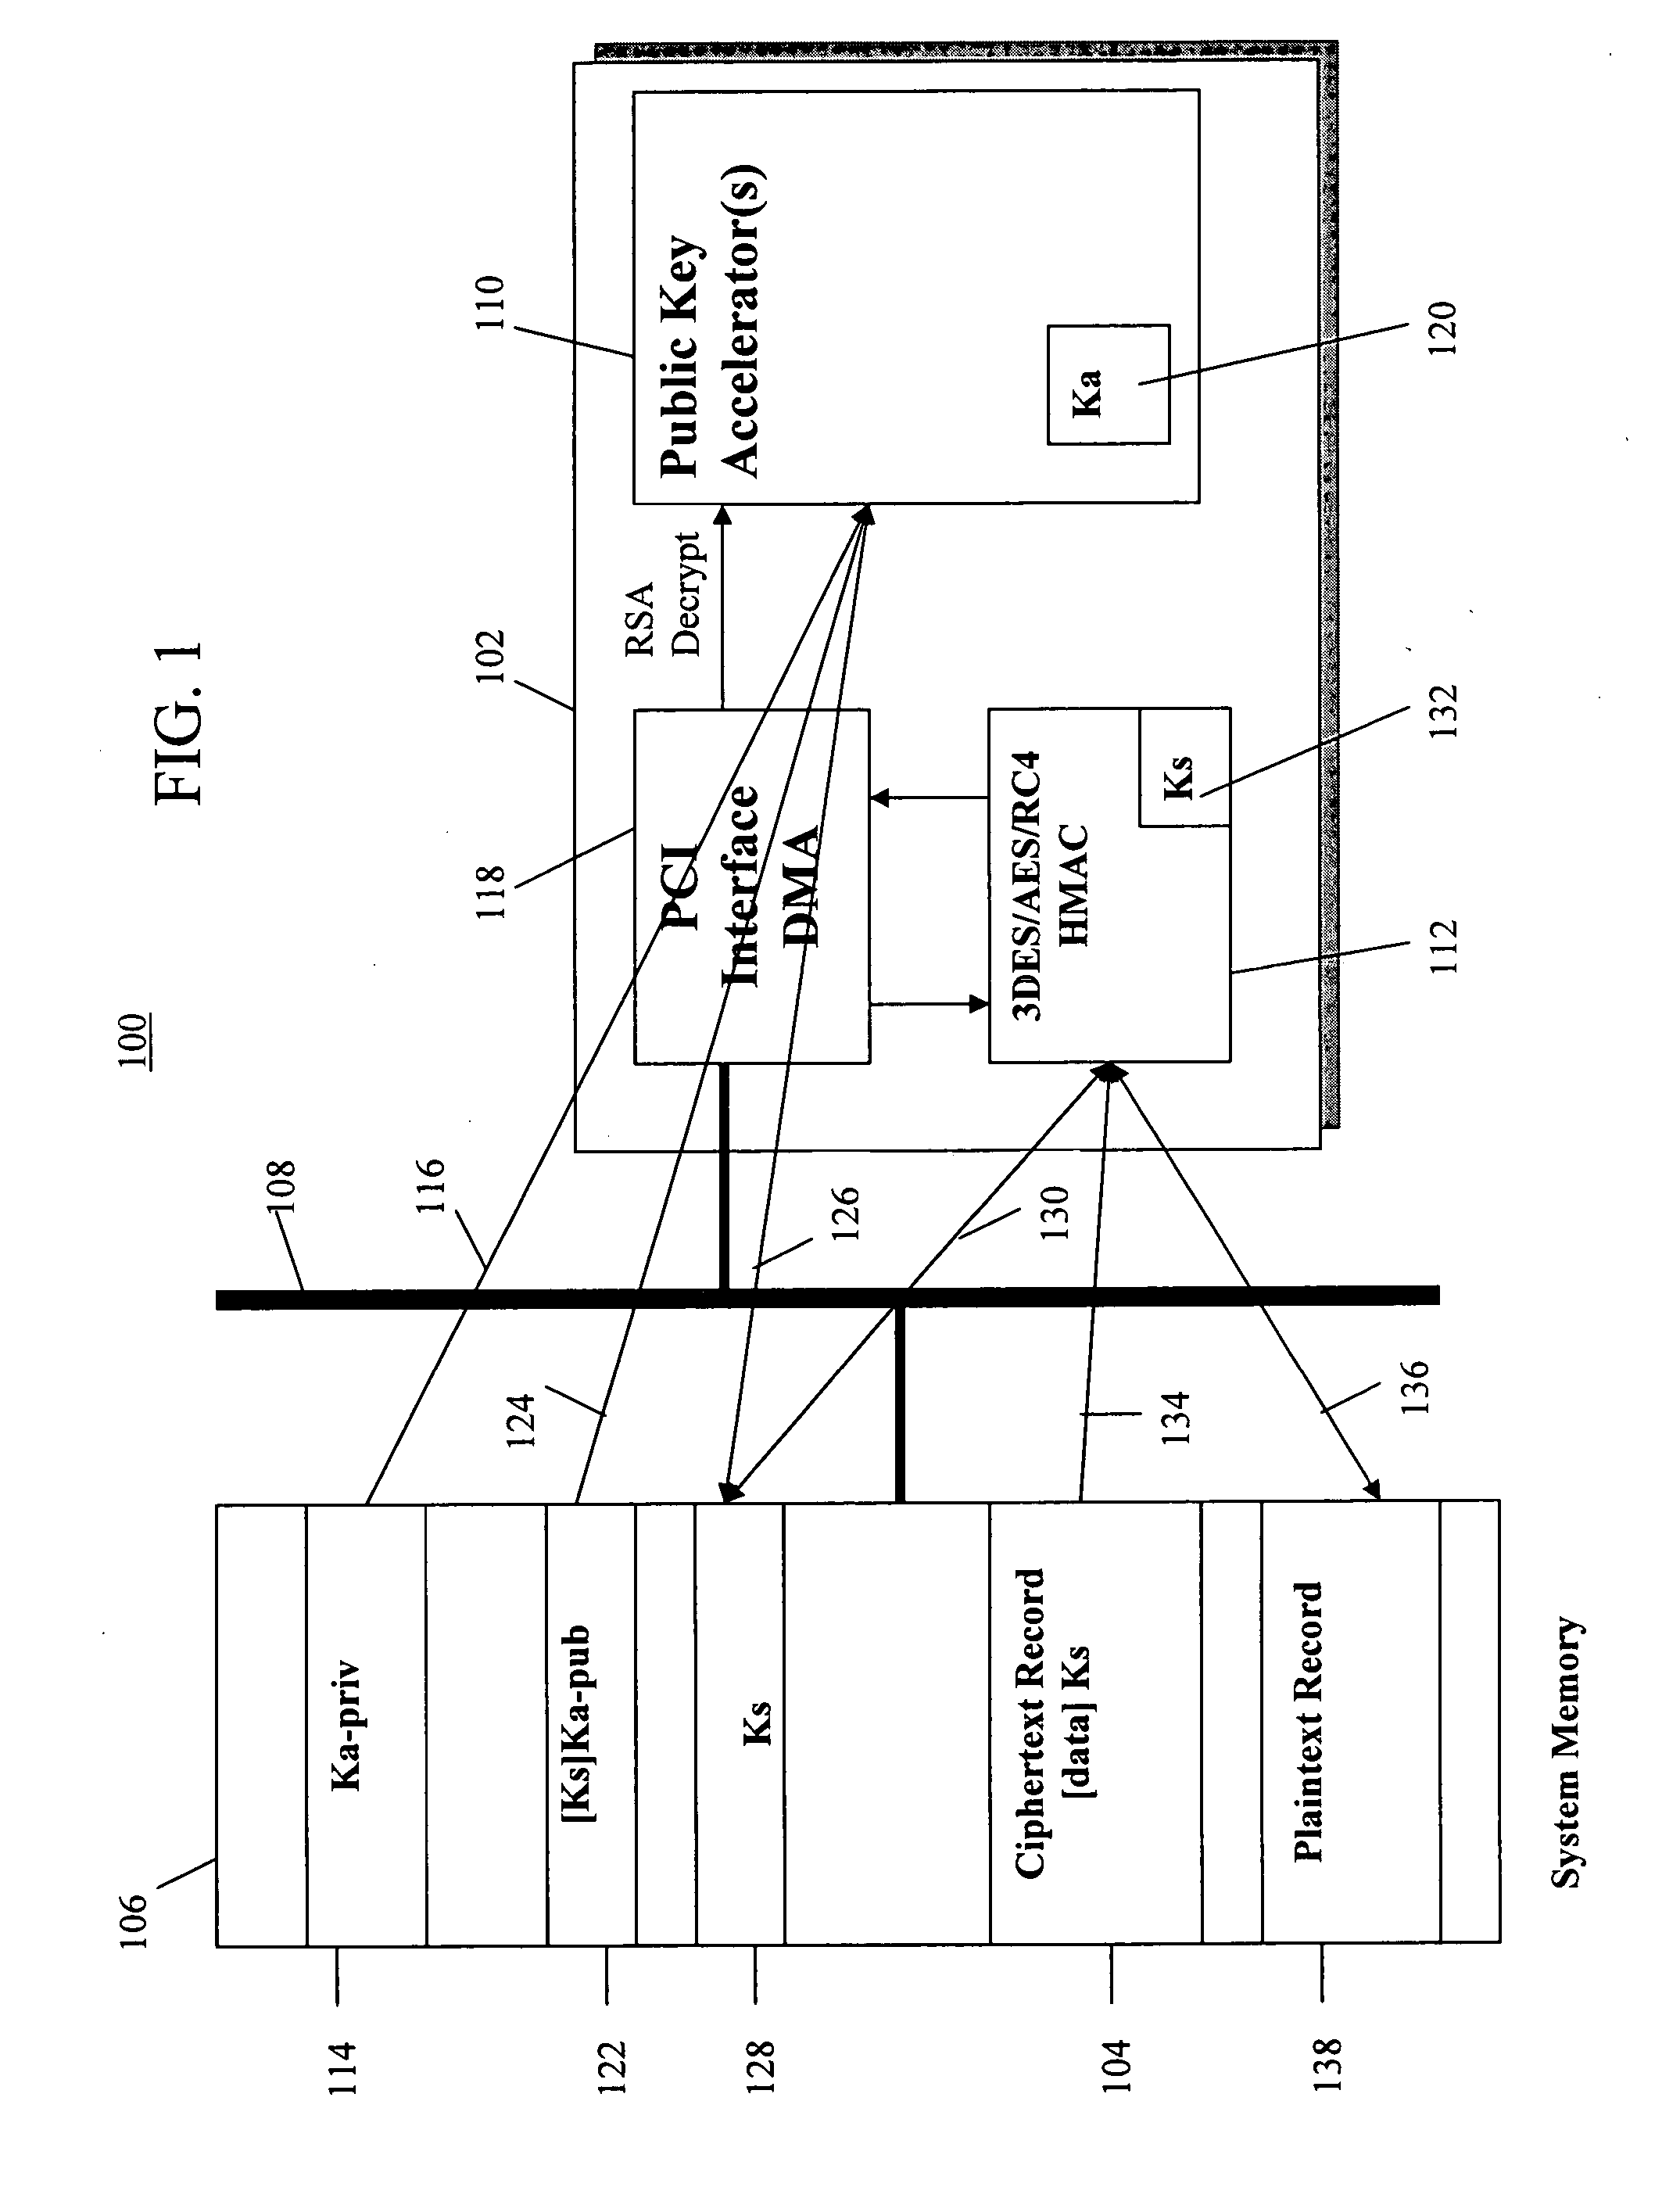 System and method for optimized reciprocal operations